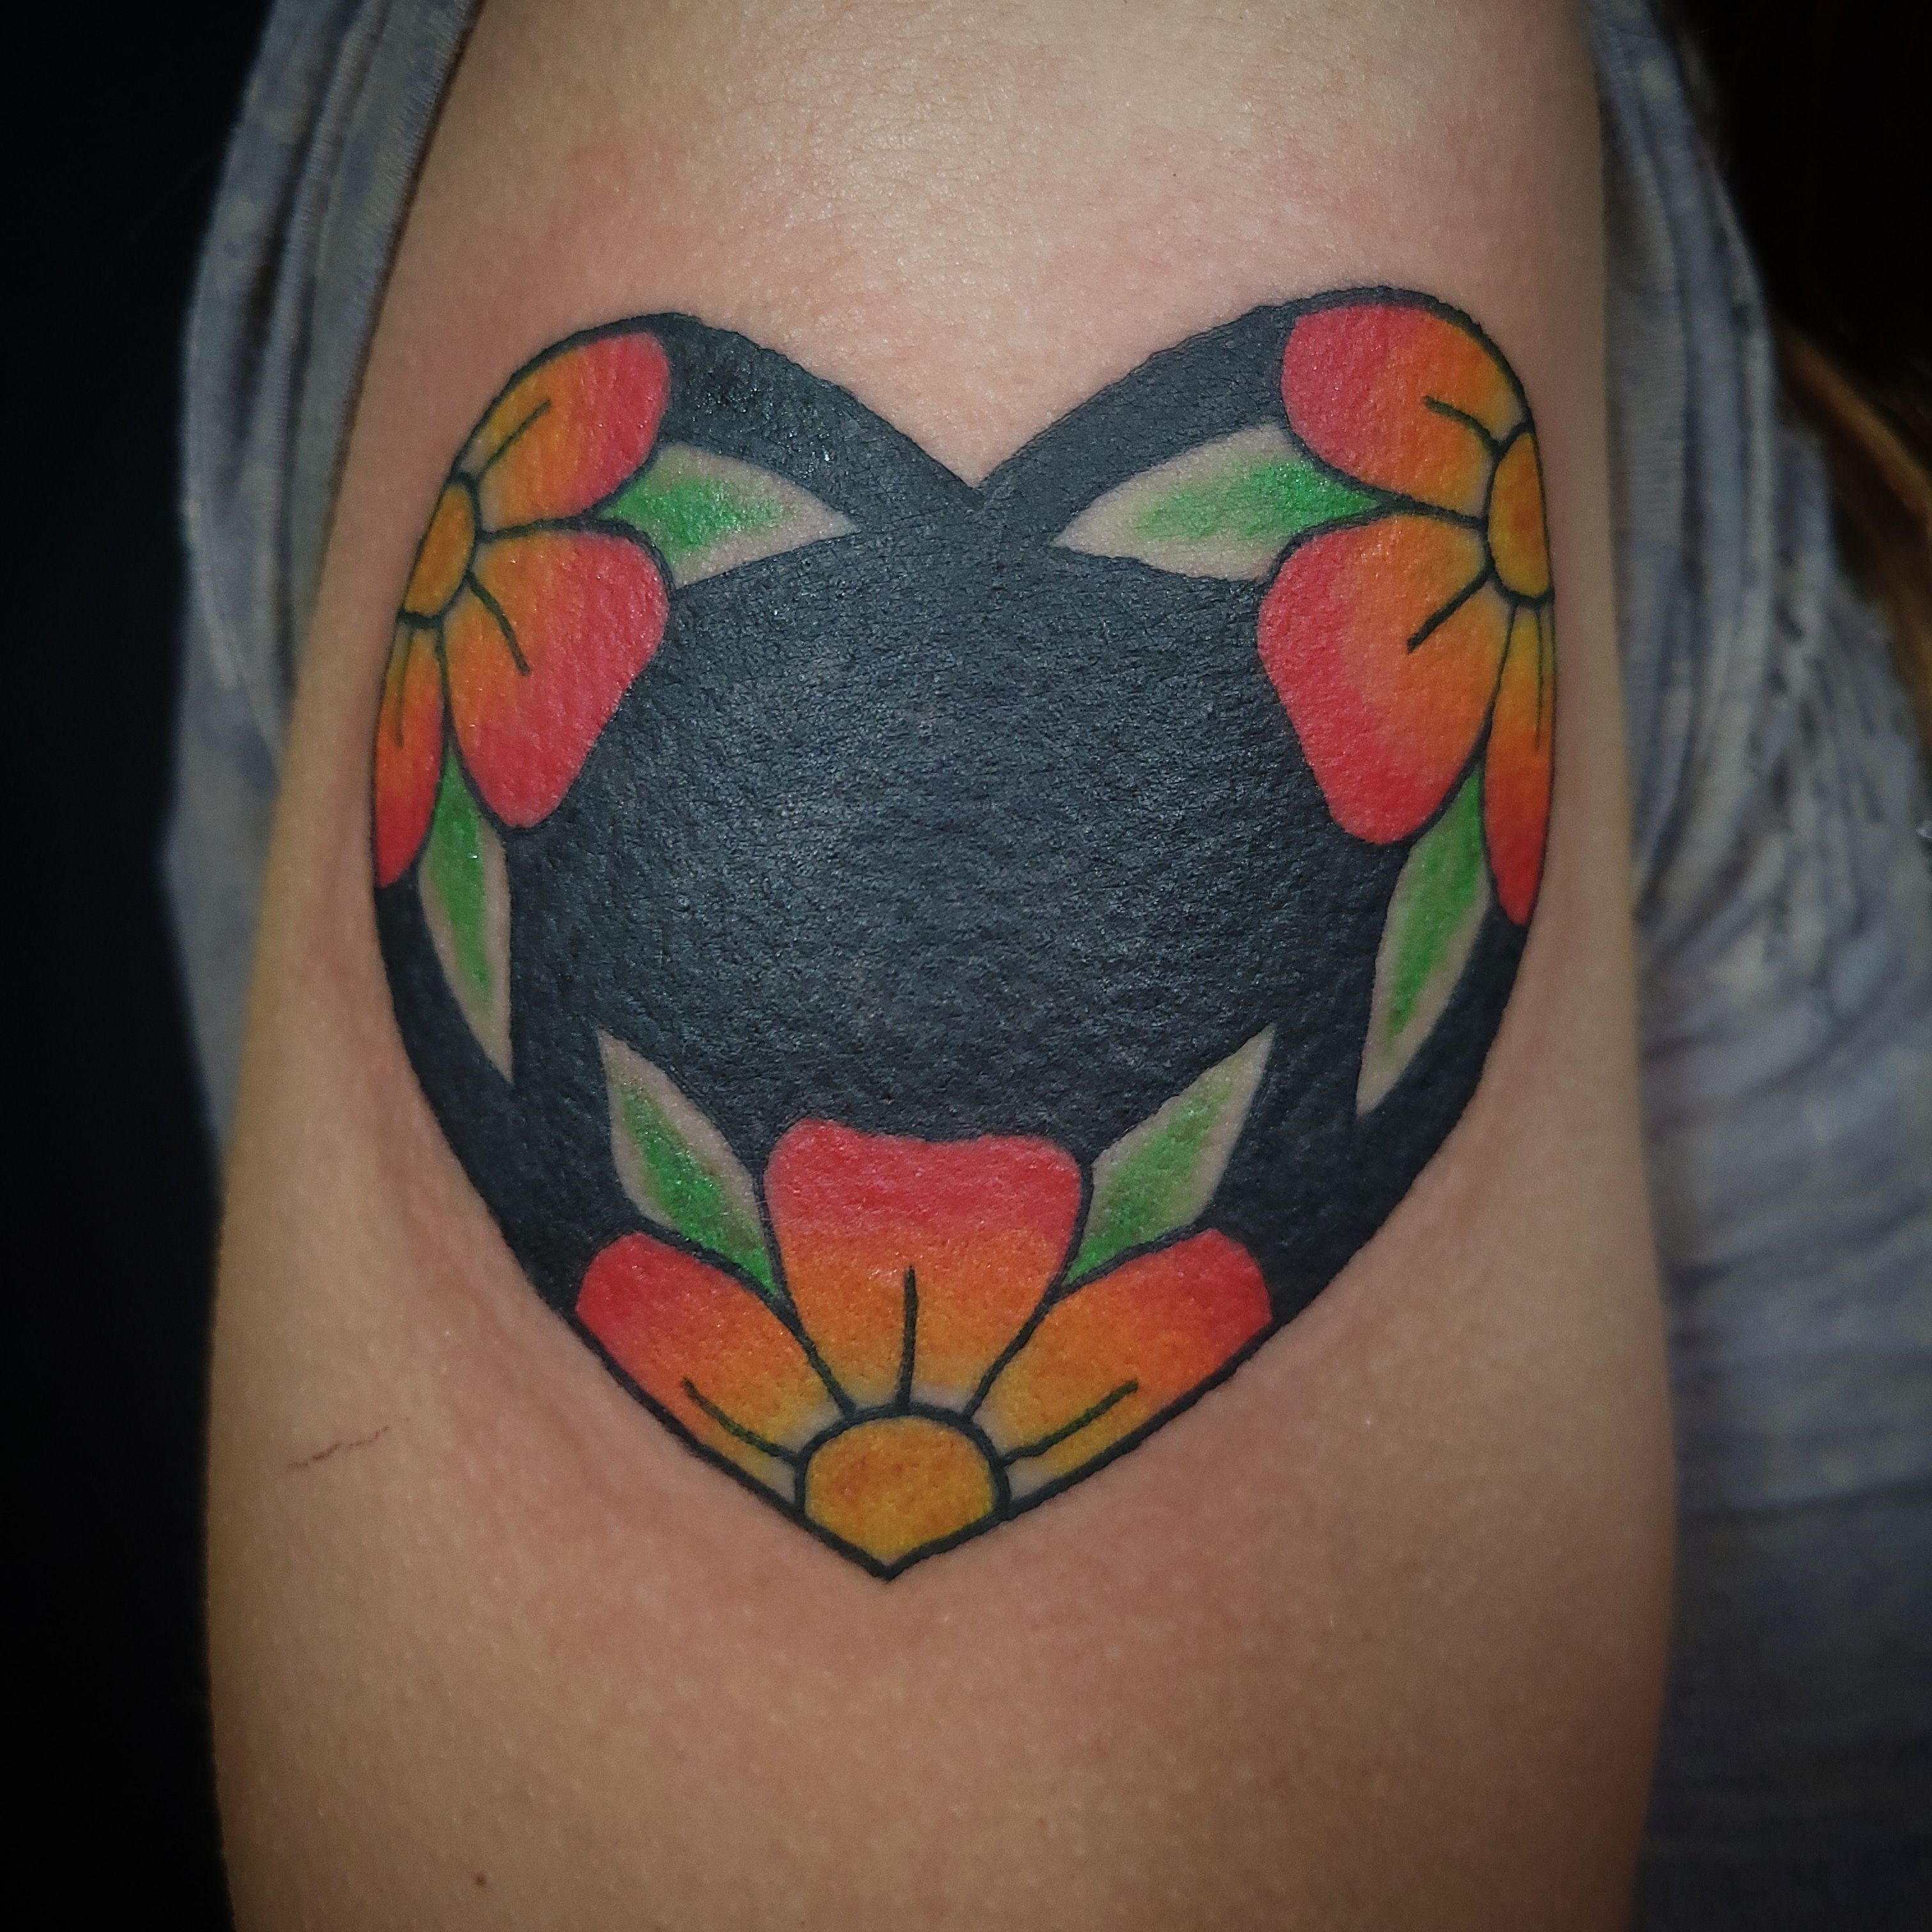 Heart tattoo with flowers inside